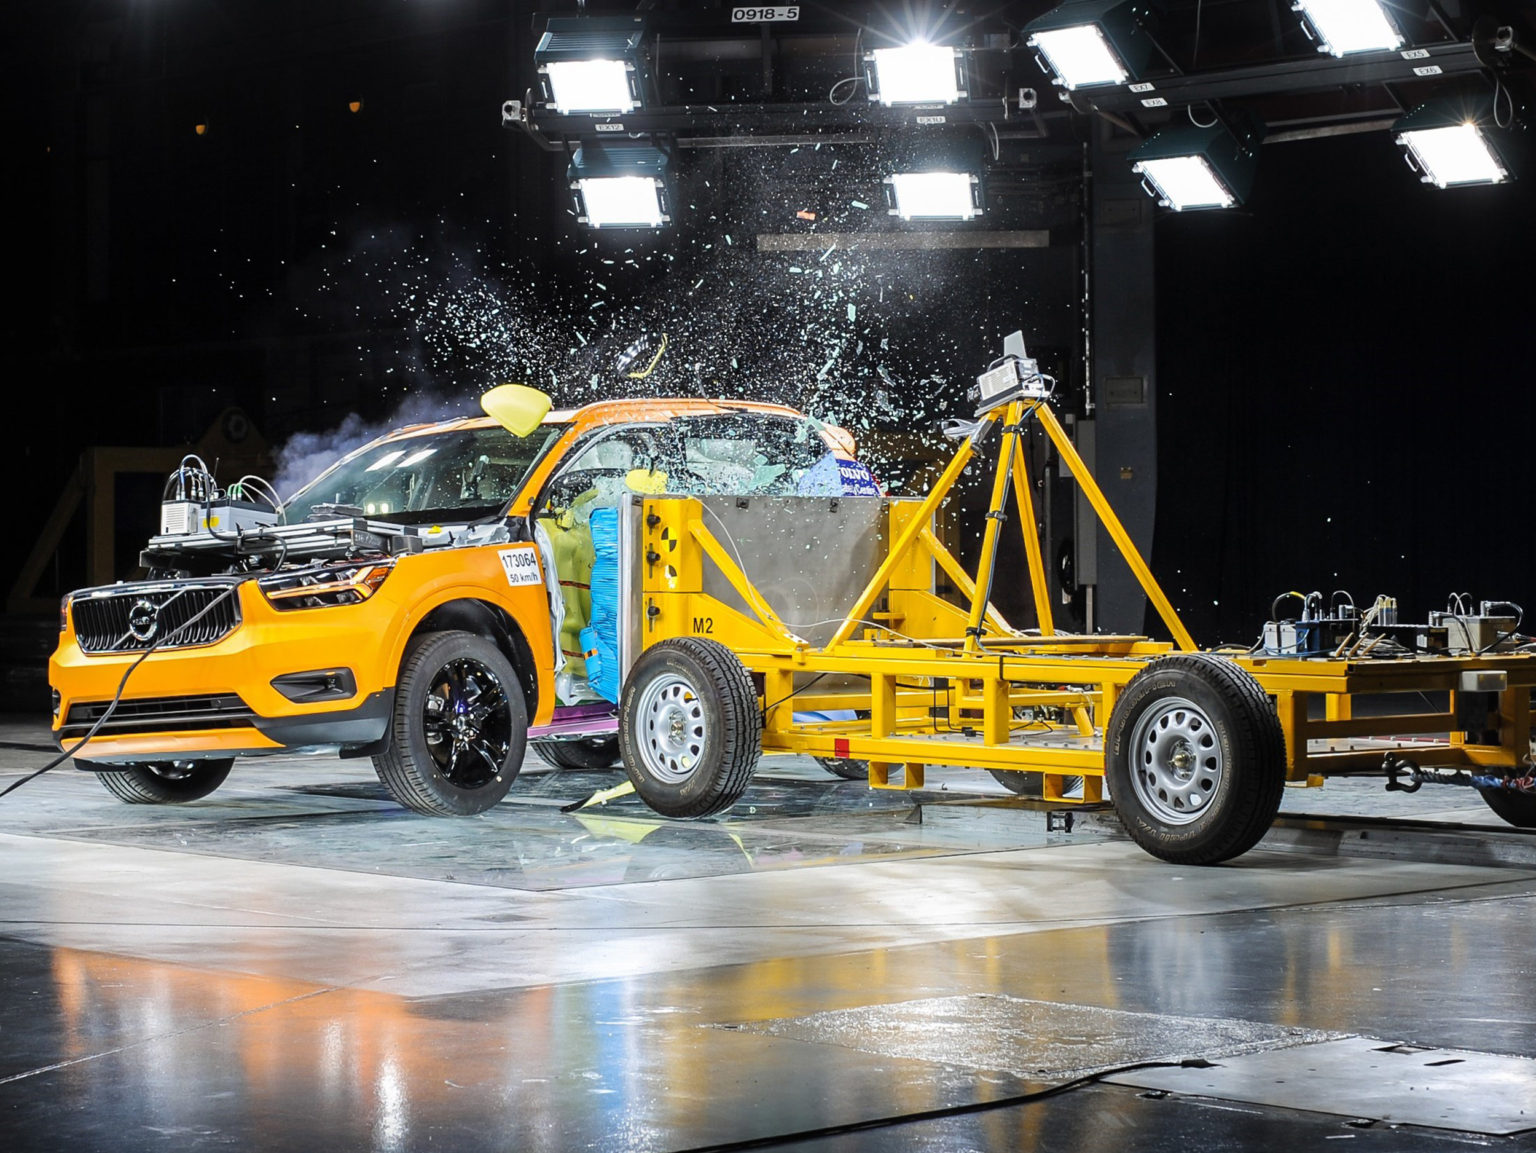 Volvo, like other automakers, crash test their vehicles ahead of them making their way to dealership lots.